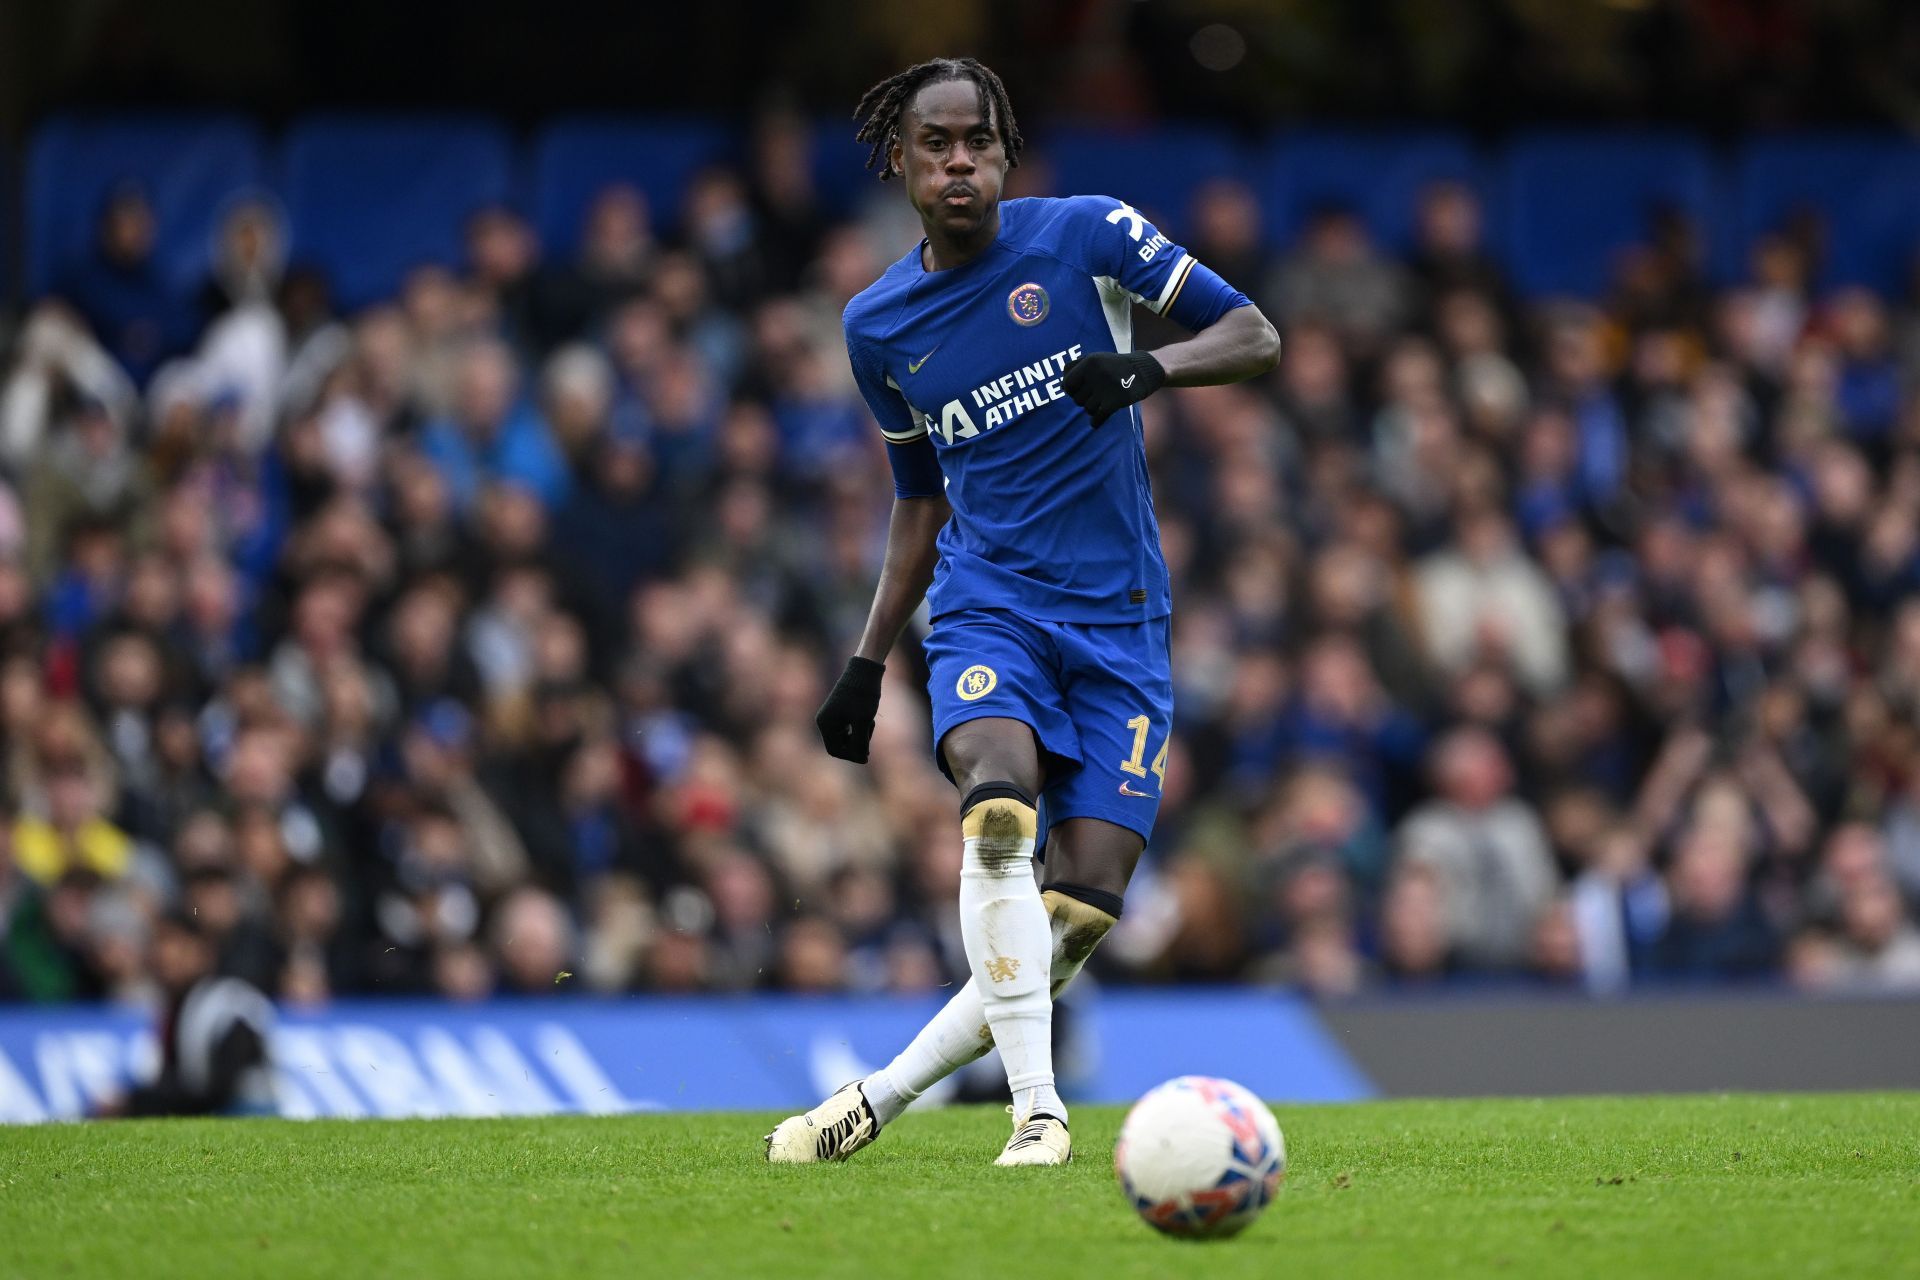 Trevoh Chalobah is likely to leave Stamford Bridge